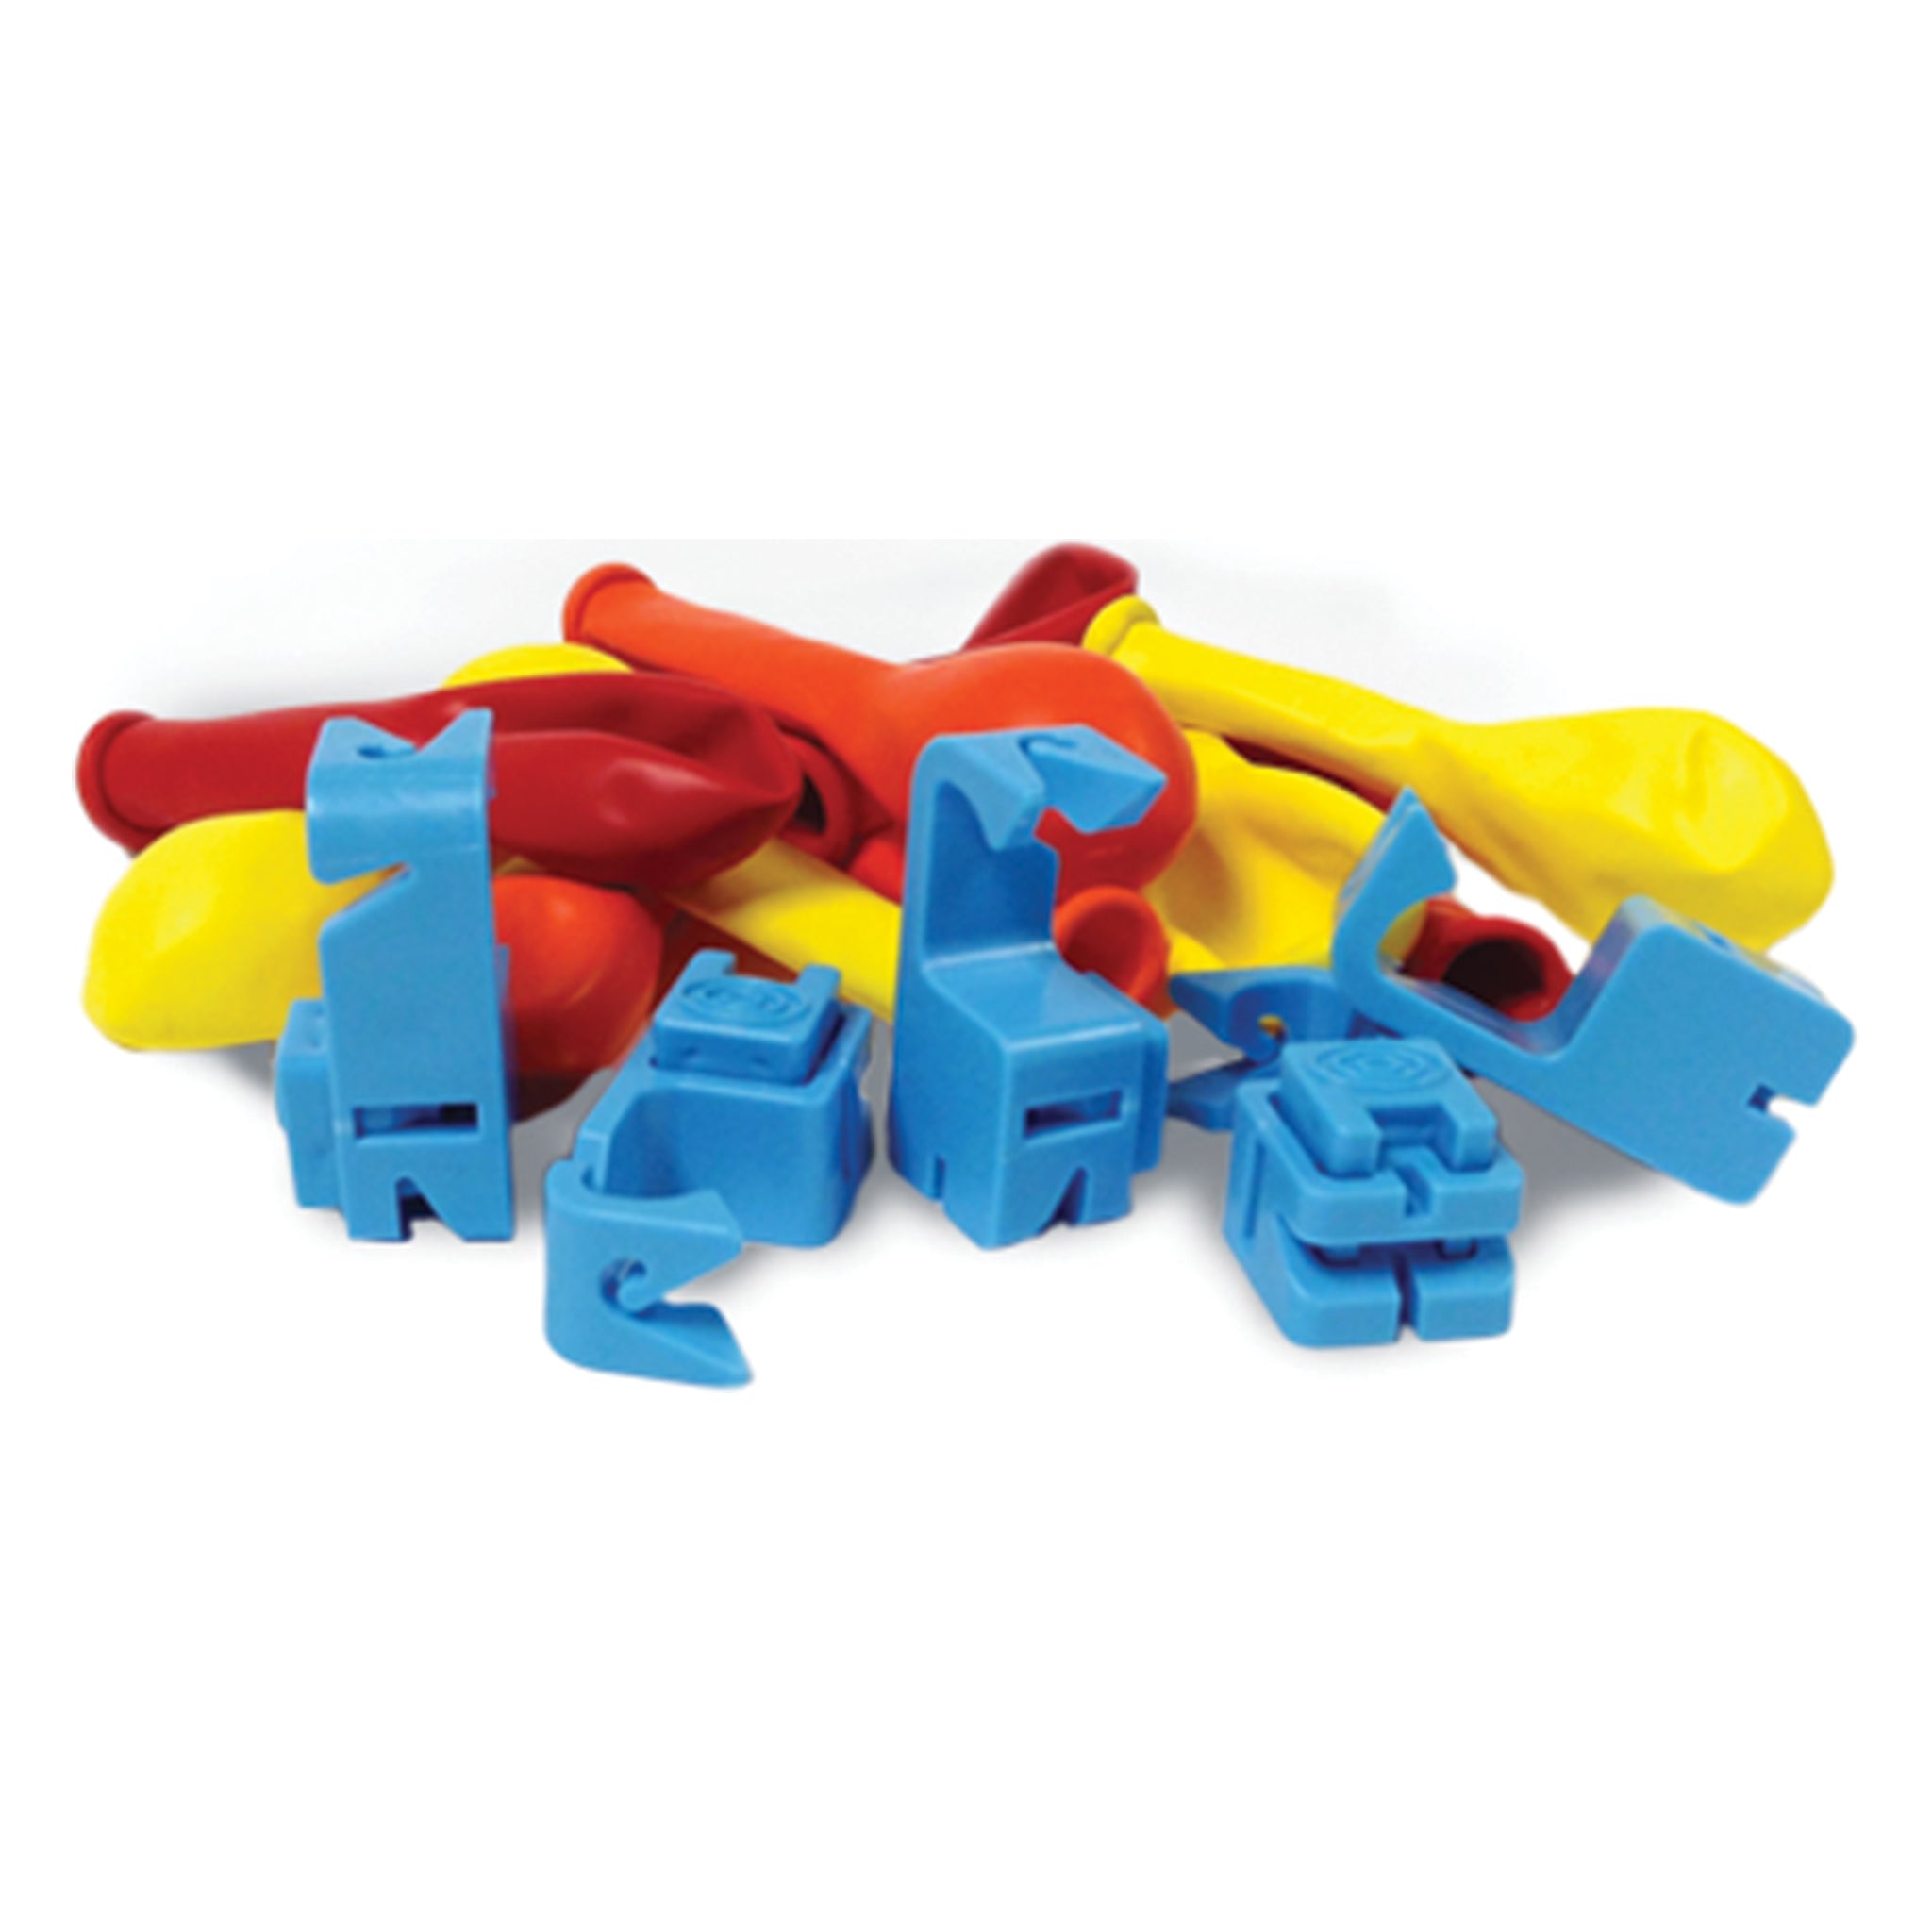 Balloon Fisher King Balloon Clips 10 Pack